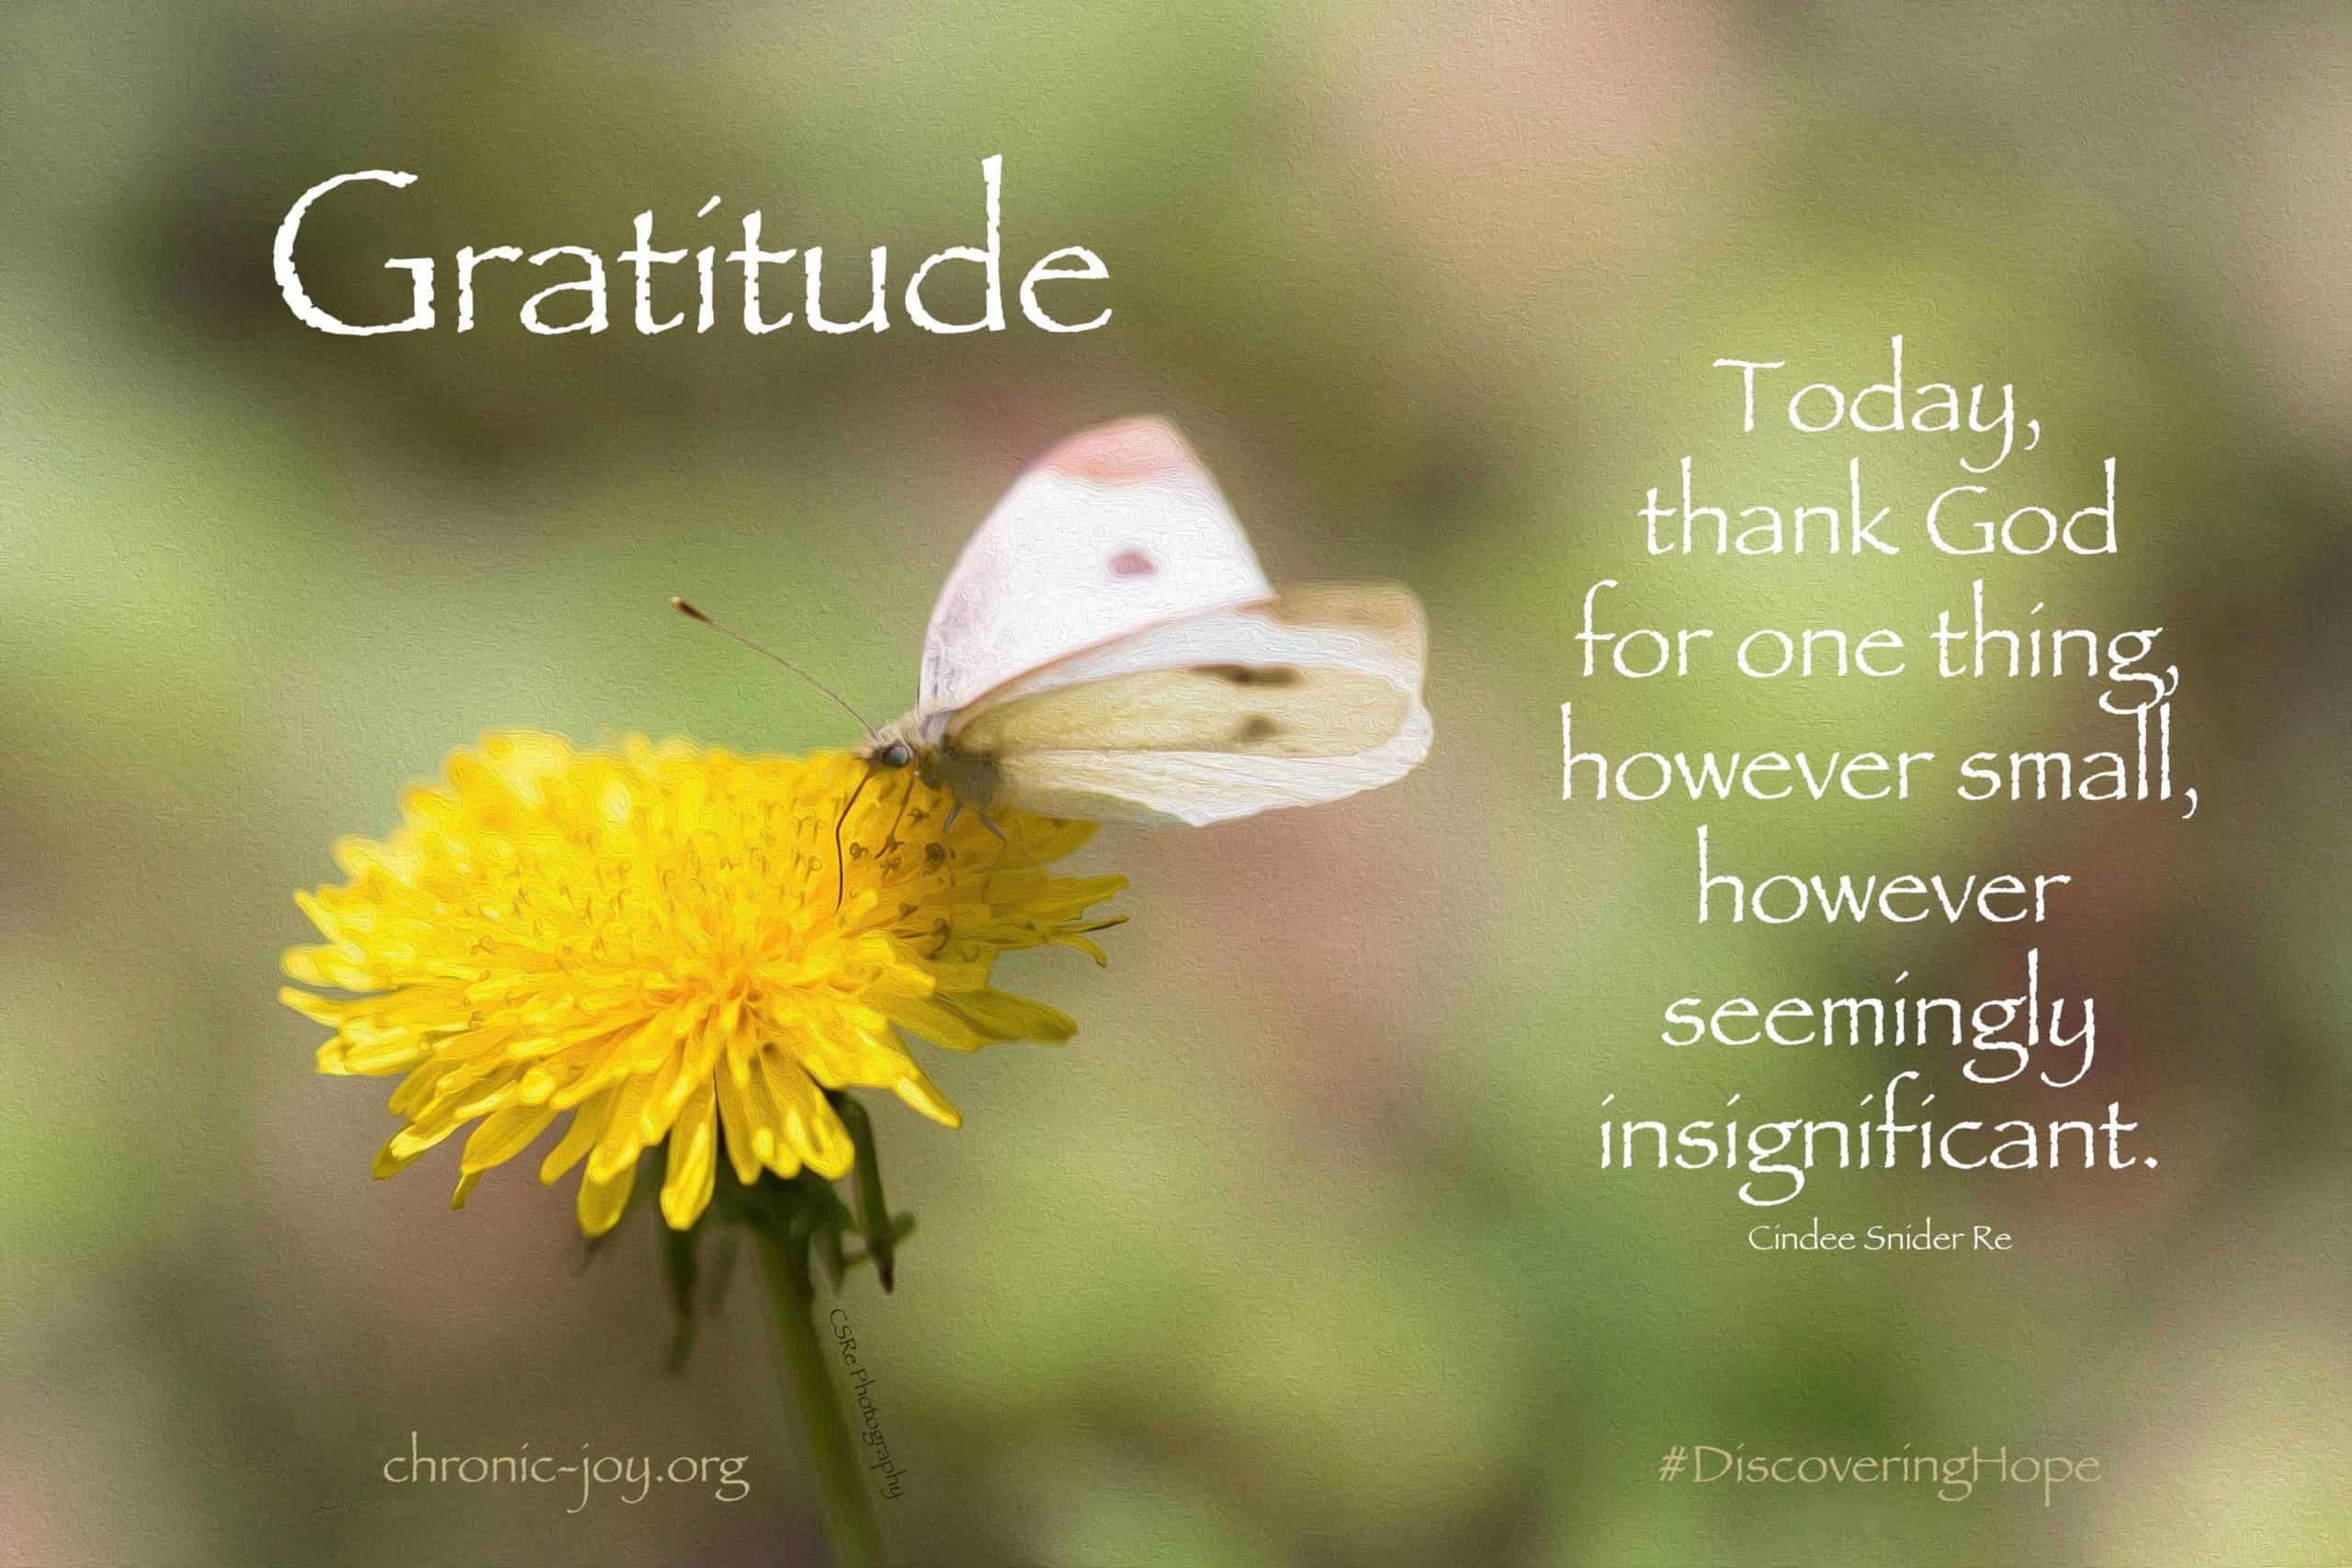 Gratitude • Today, thank God for one thing, however small, however seemingly insignificant.